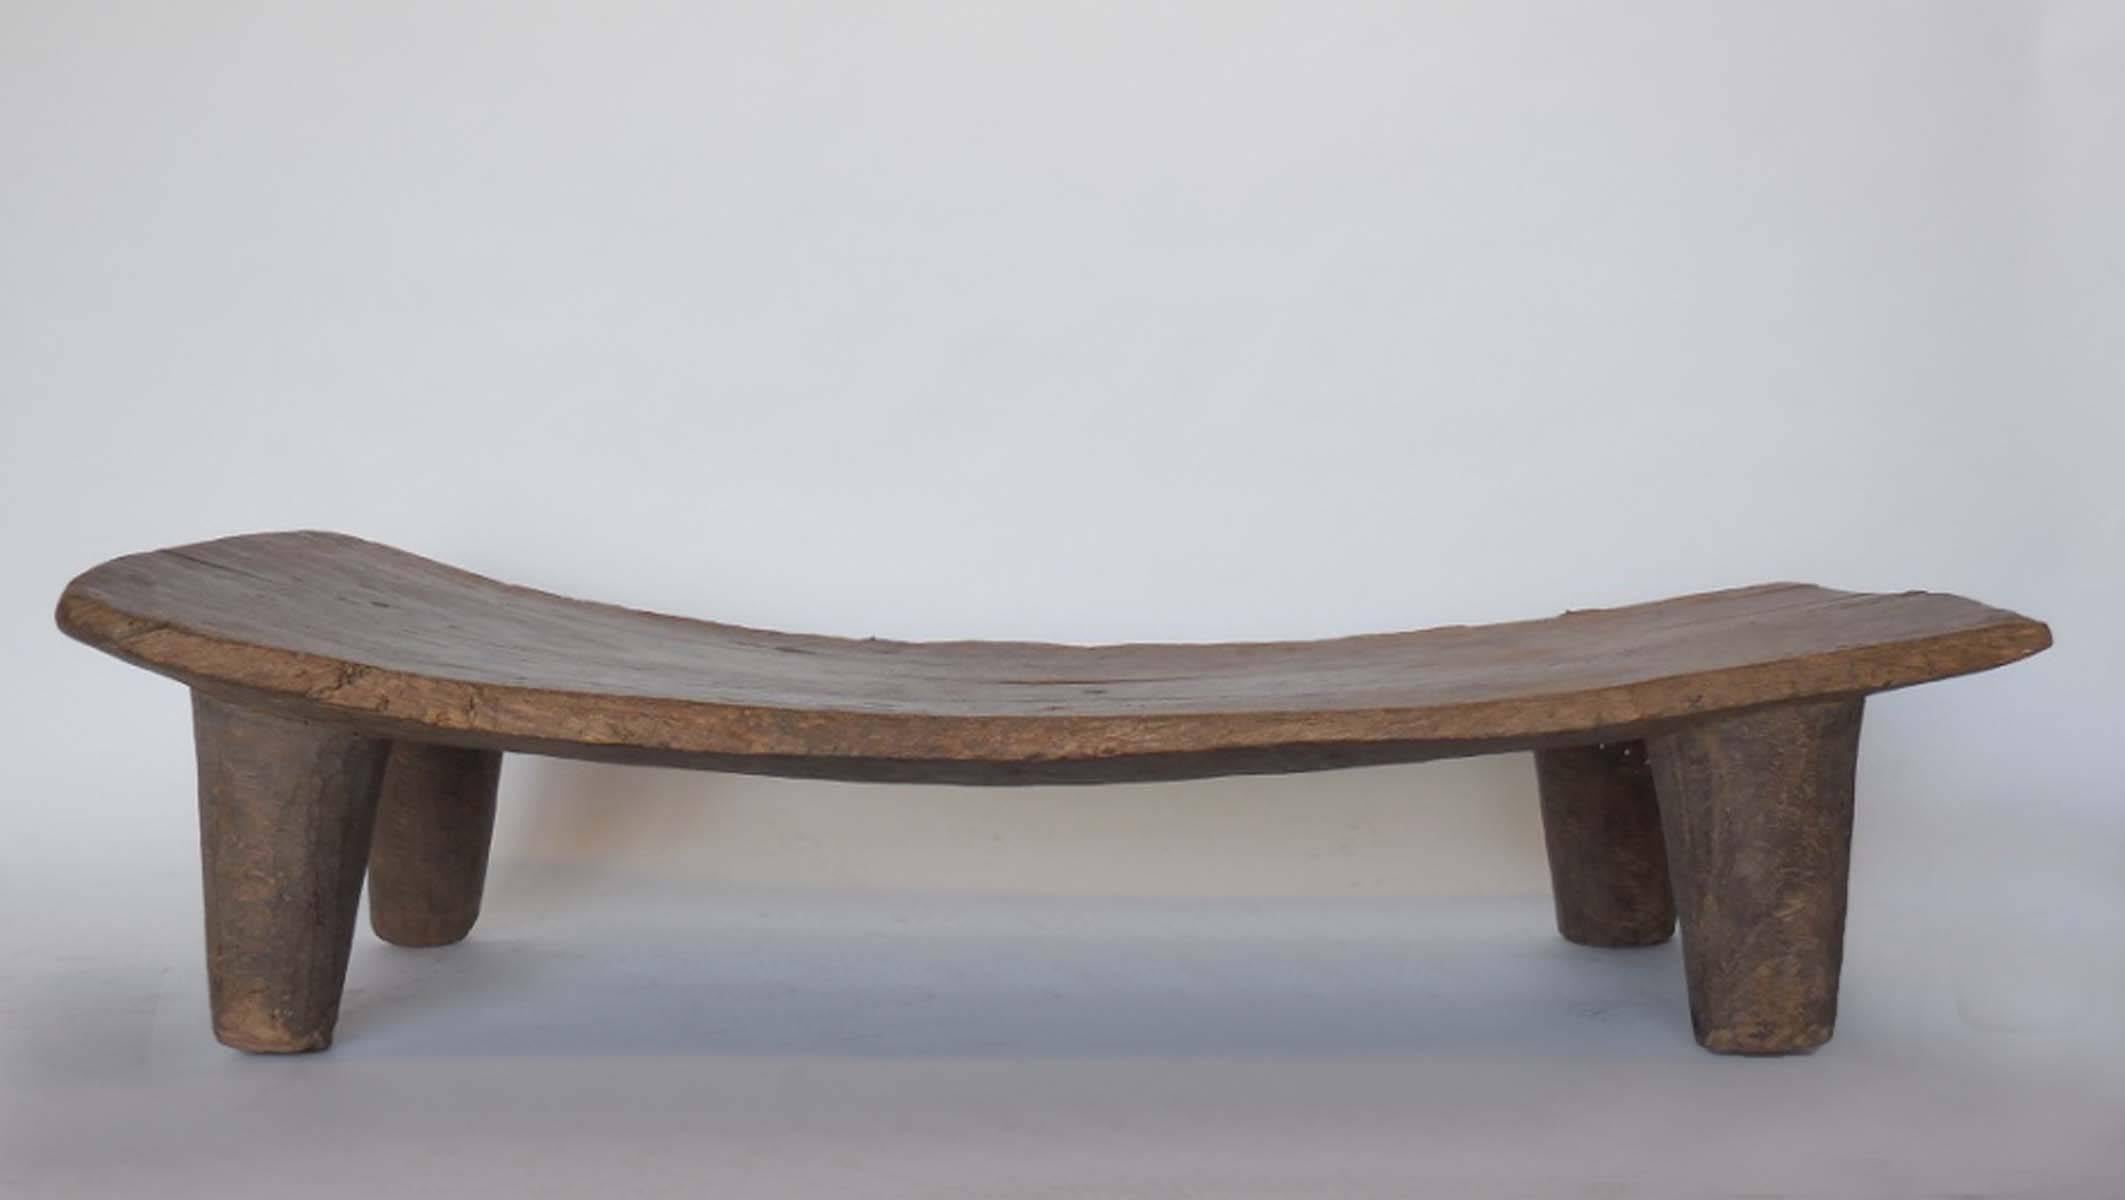 Tribal Antique African Nupe Child's Bed, Coffee Table or Bench